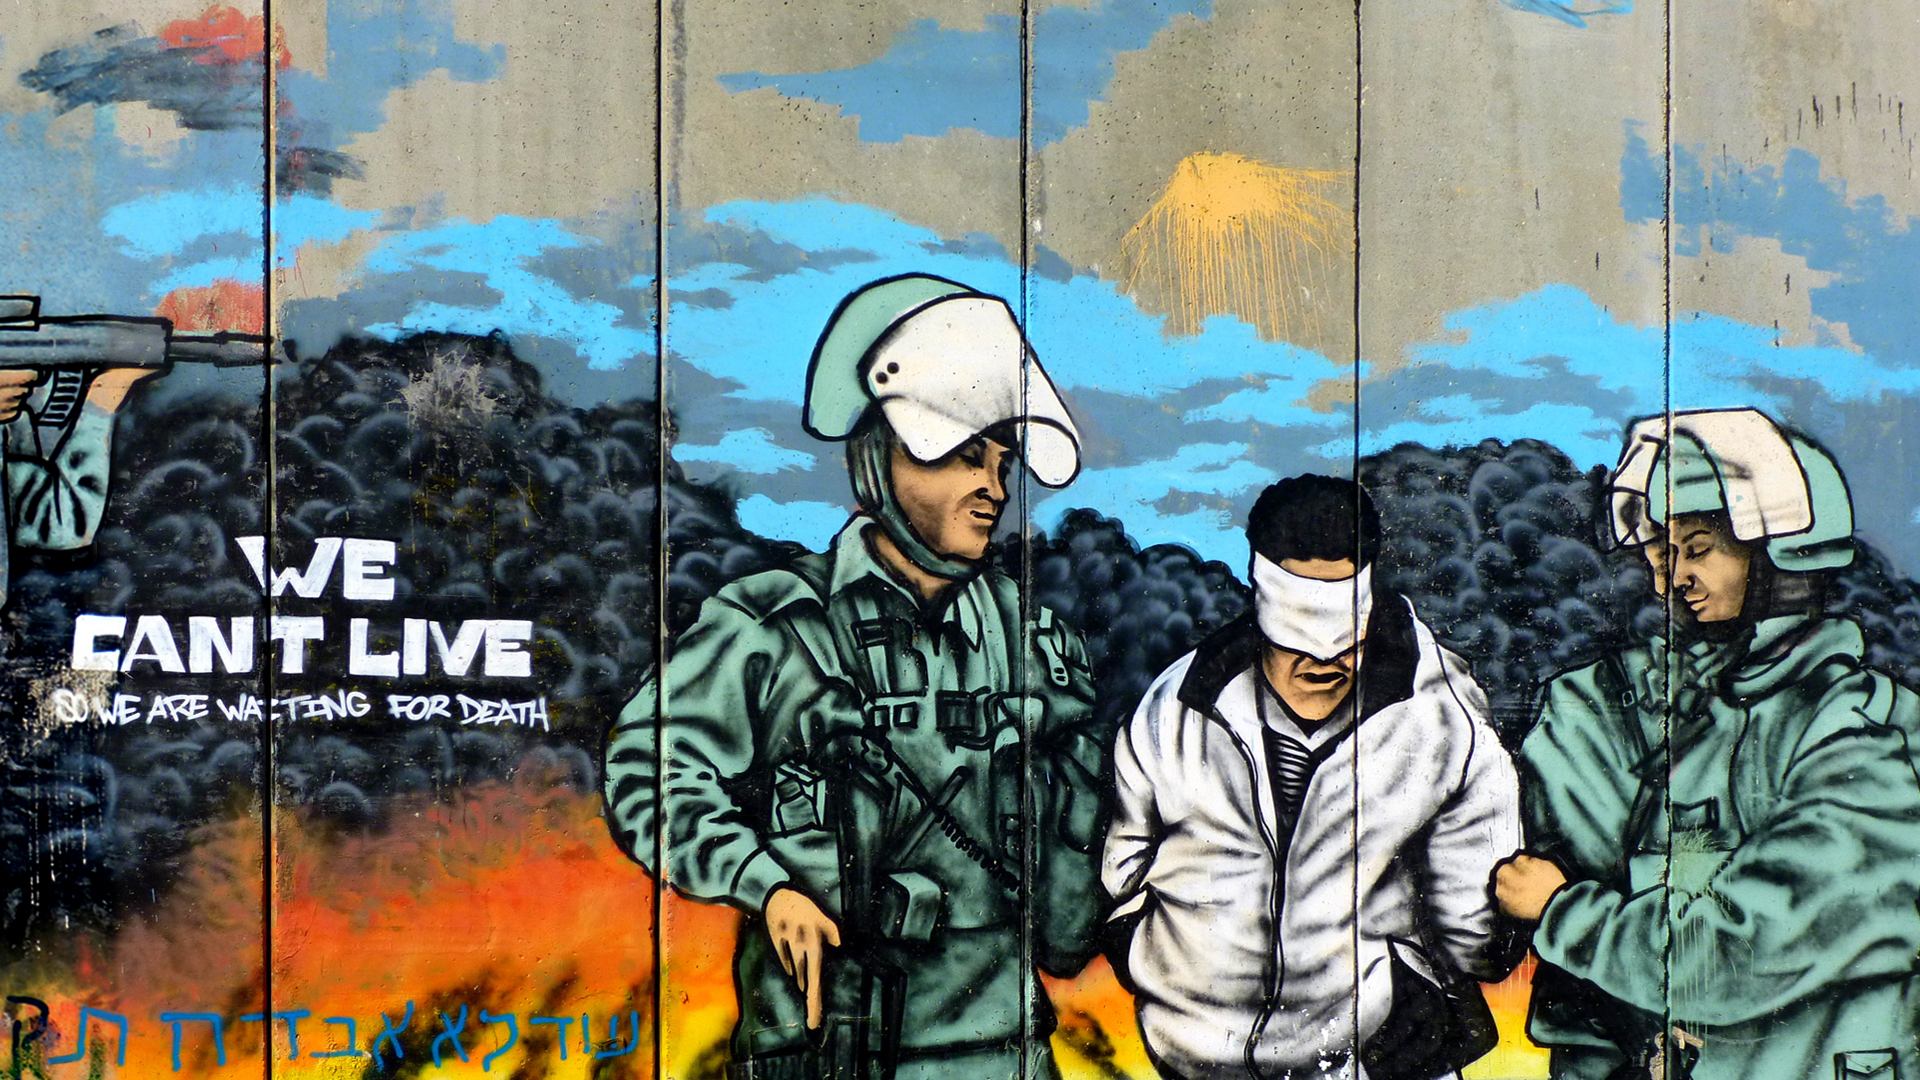 Graffiti on the Palestinian side of the West Bank